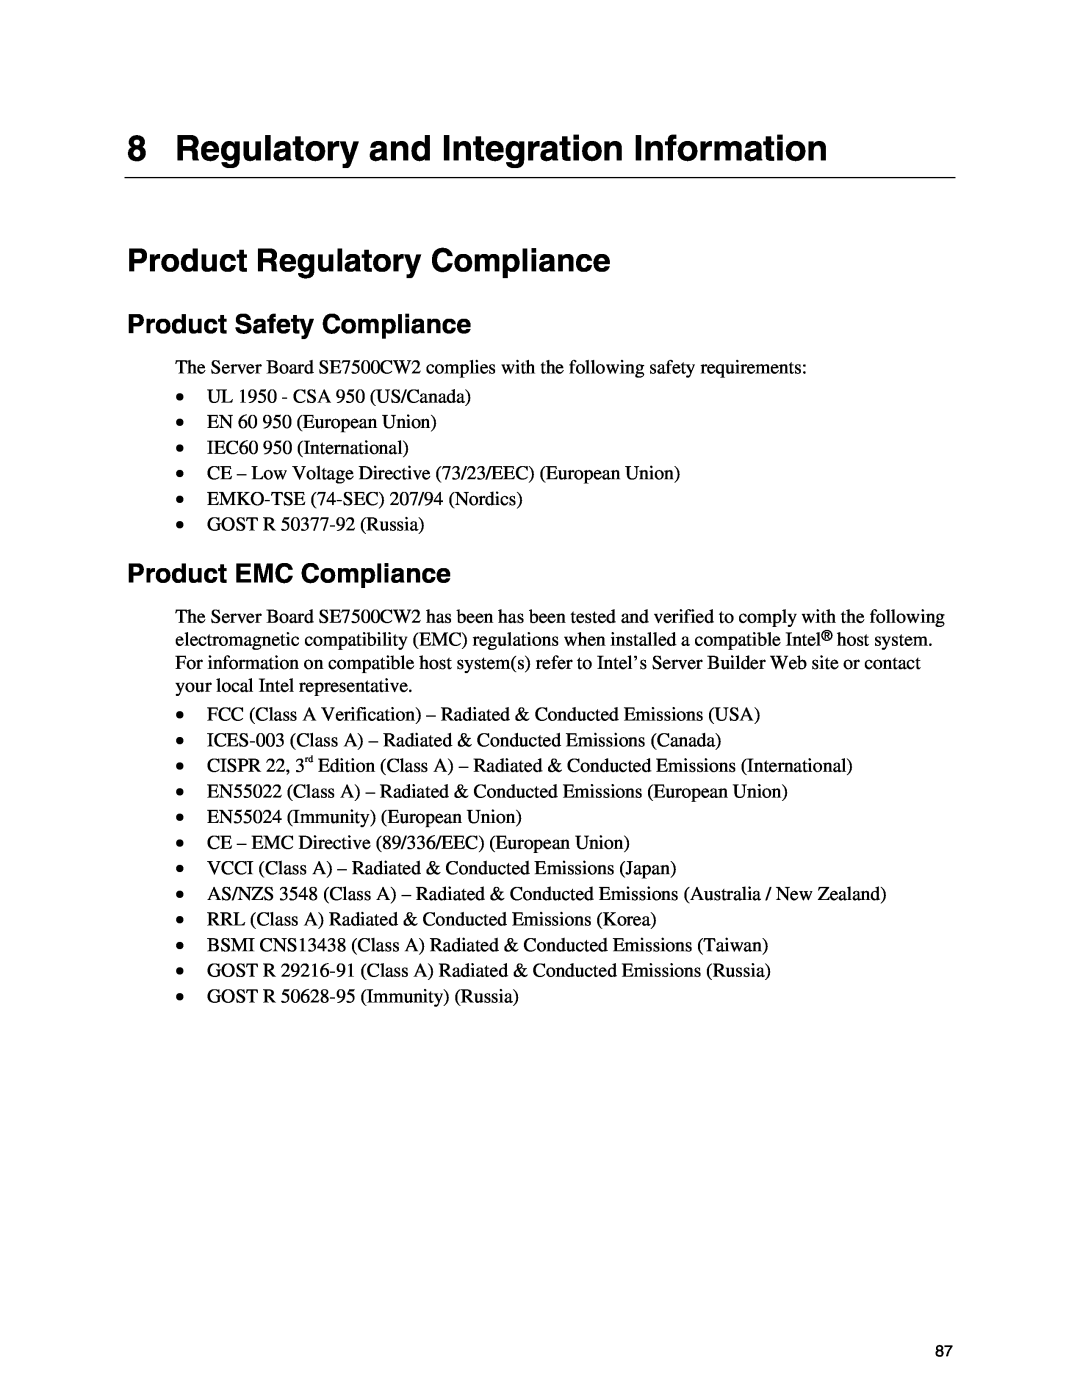 Intel SE7500CW2 manual Regulatory and Integration Information, Product Regulatory Compliance, Product Safety Compliance 